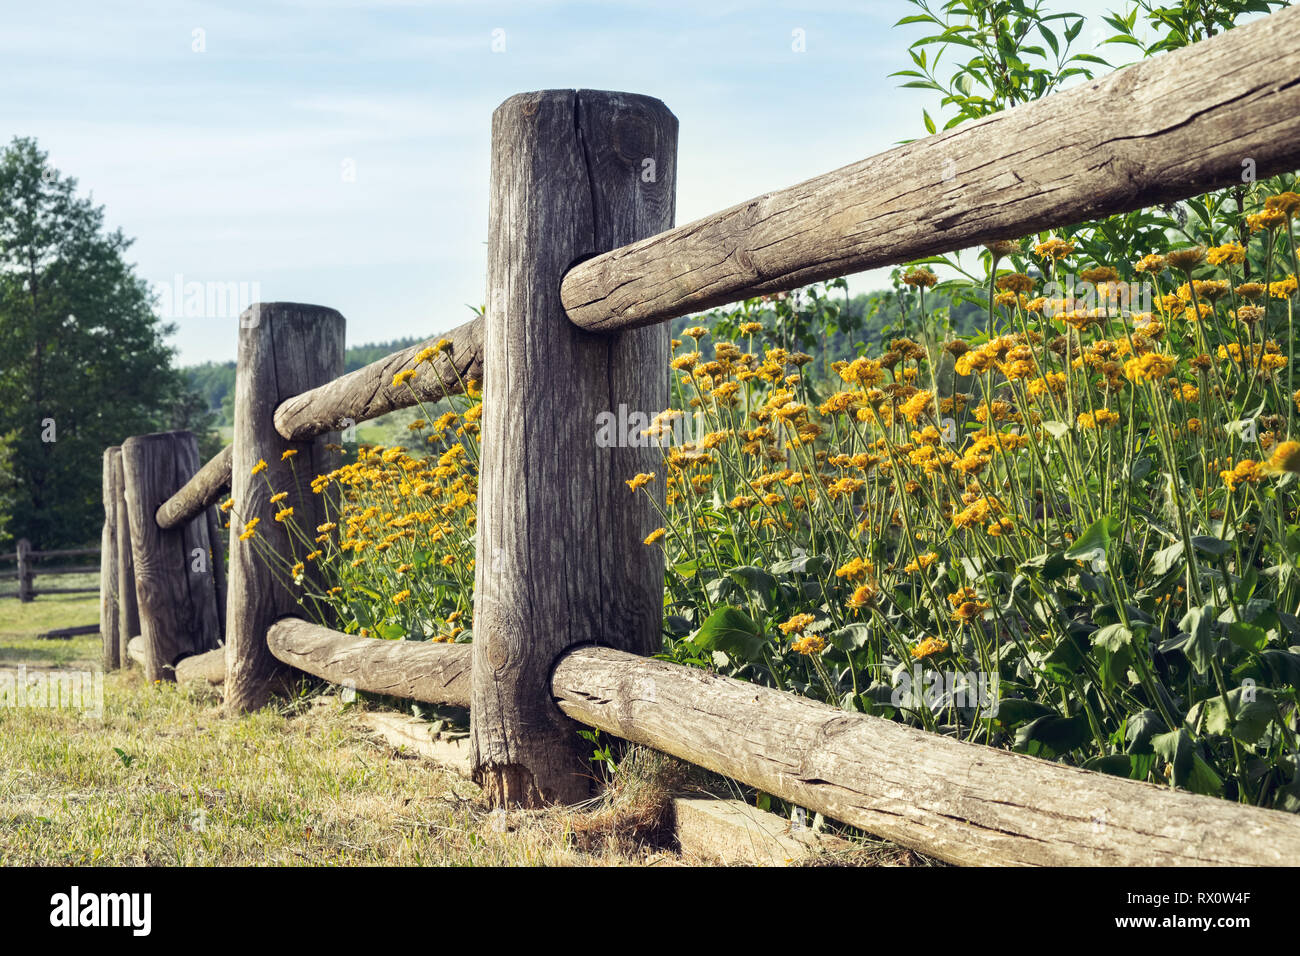 Wooden rustic fence and flowerbed in the village. Stock Photo